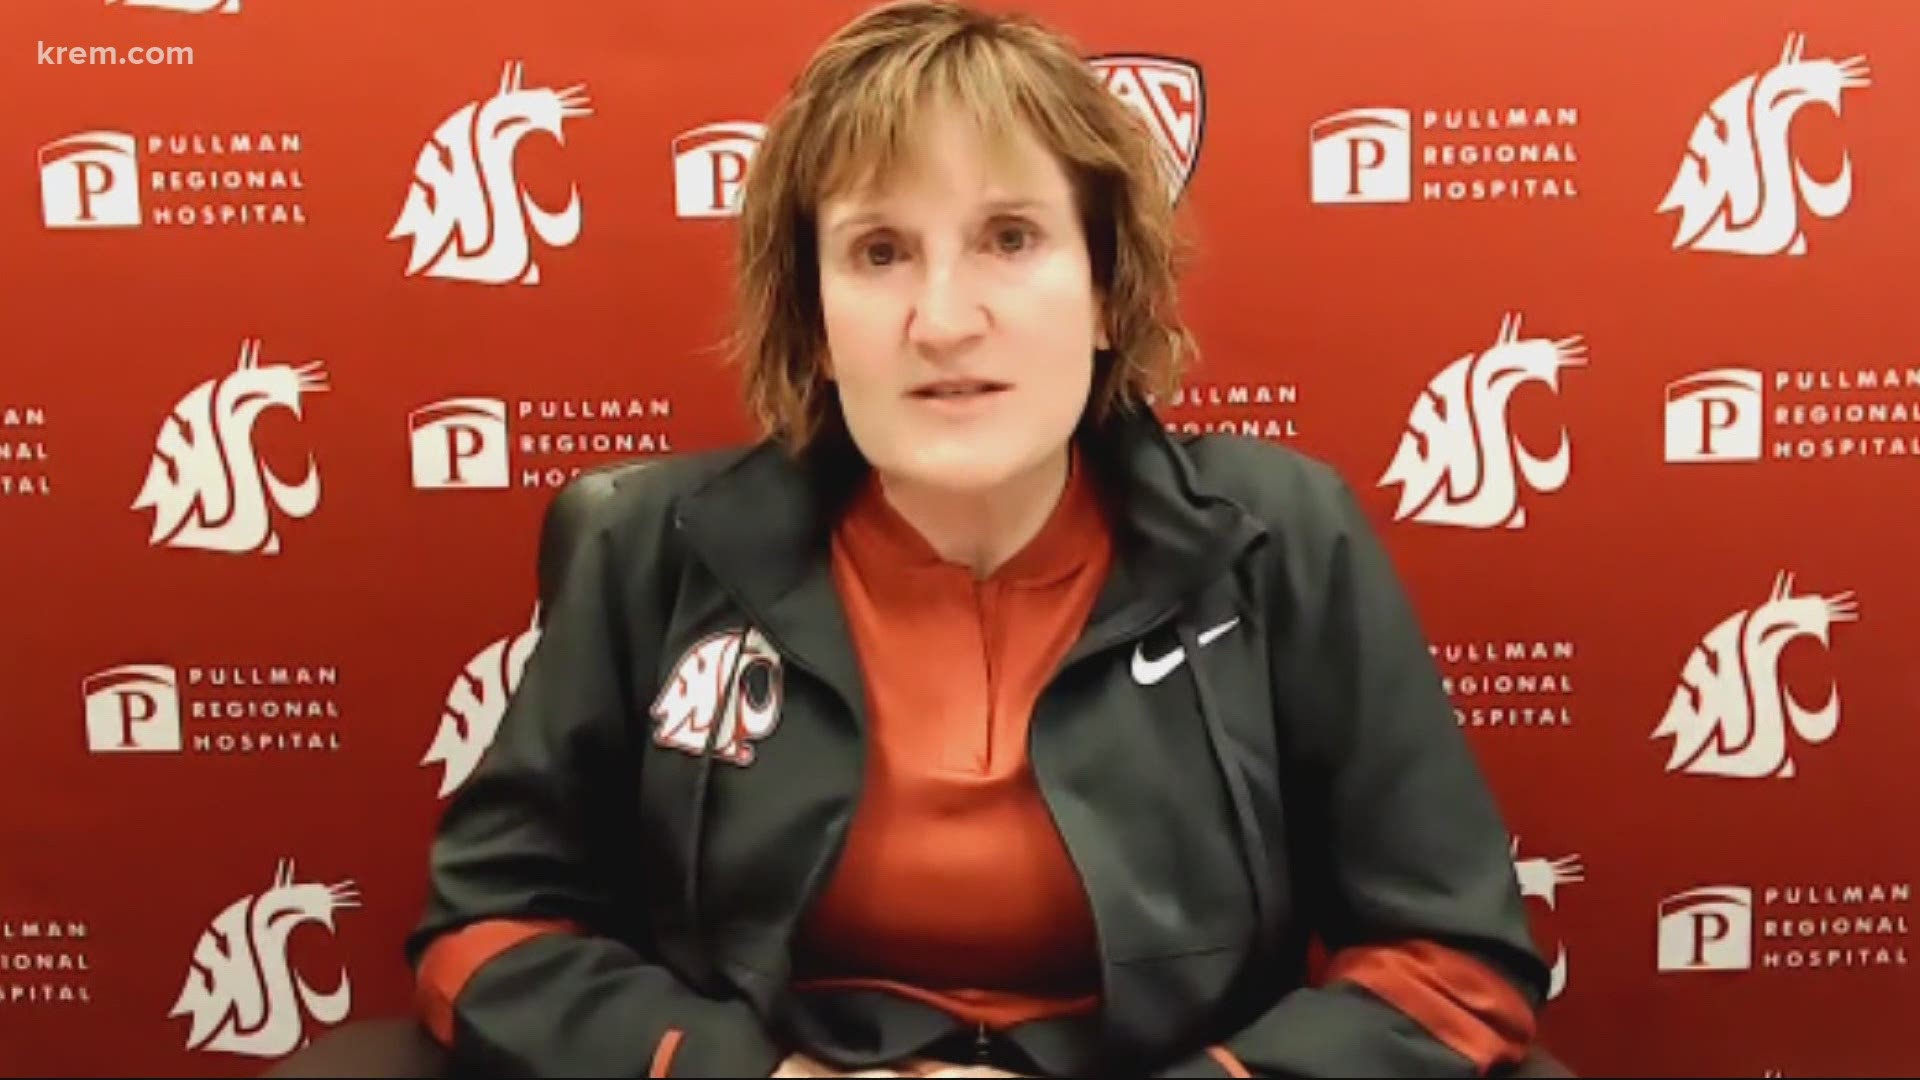 With WSU women's basketball team making it to the big dance, the Inland Northwest will send the most teams it ever has to the NCAA Tournaments with 4.